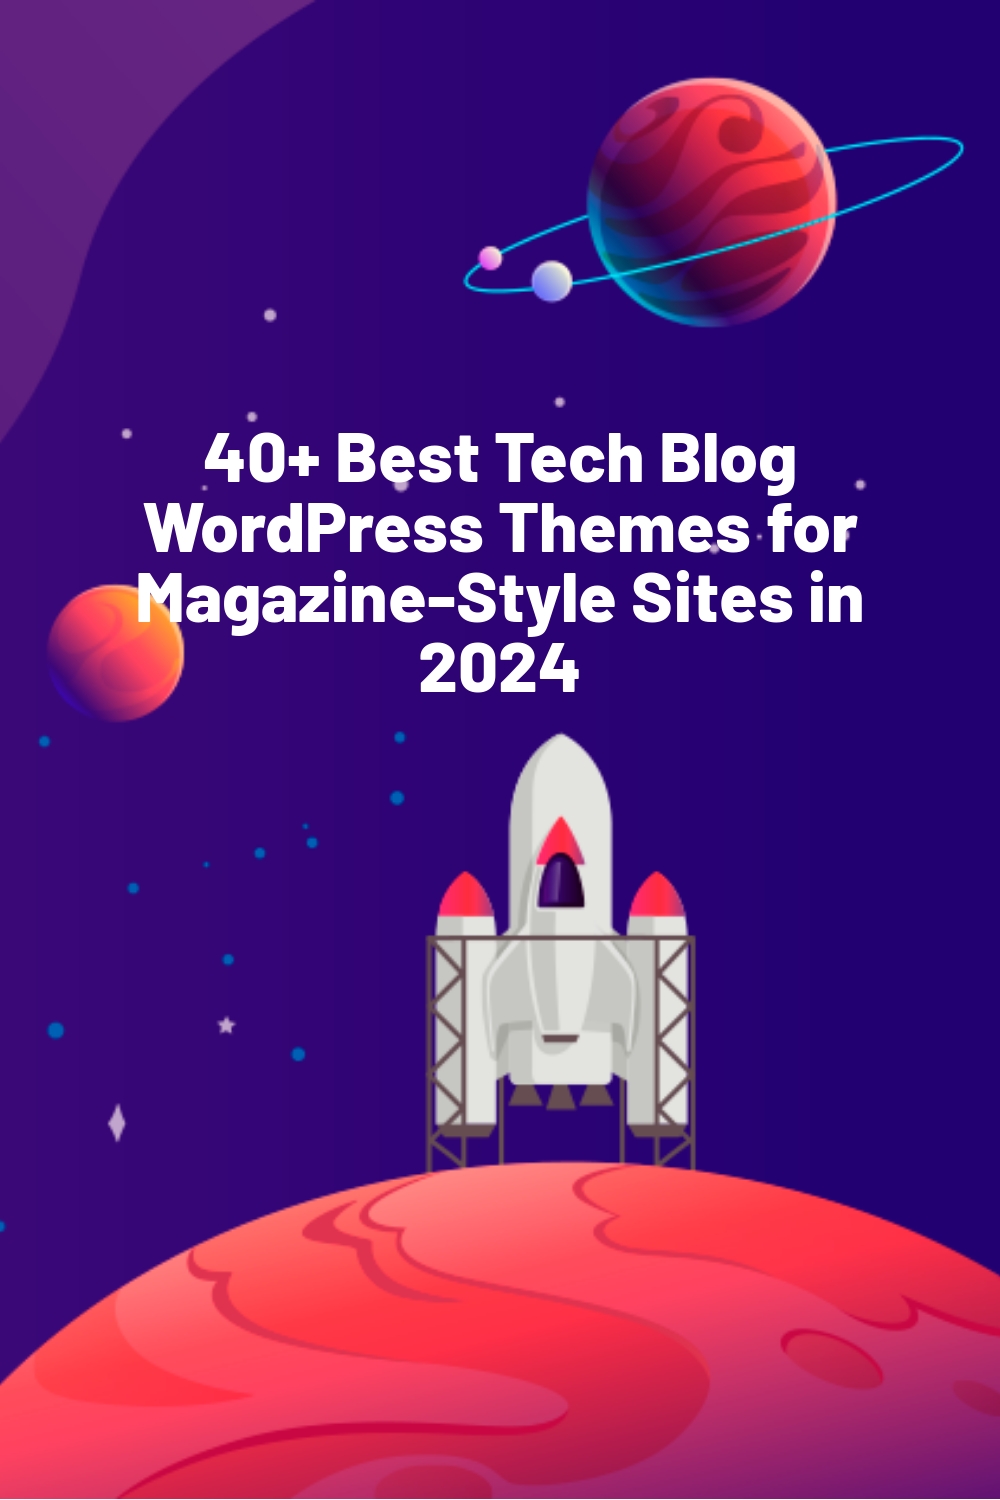 40+ Best Tech Blog WordPress Themes for Magazine-Style Sites in 2024